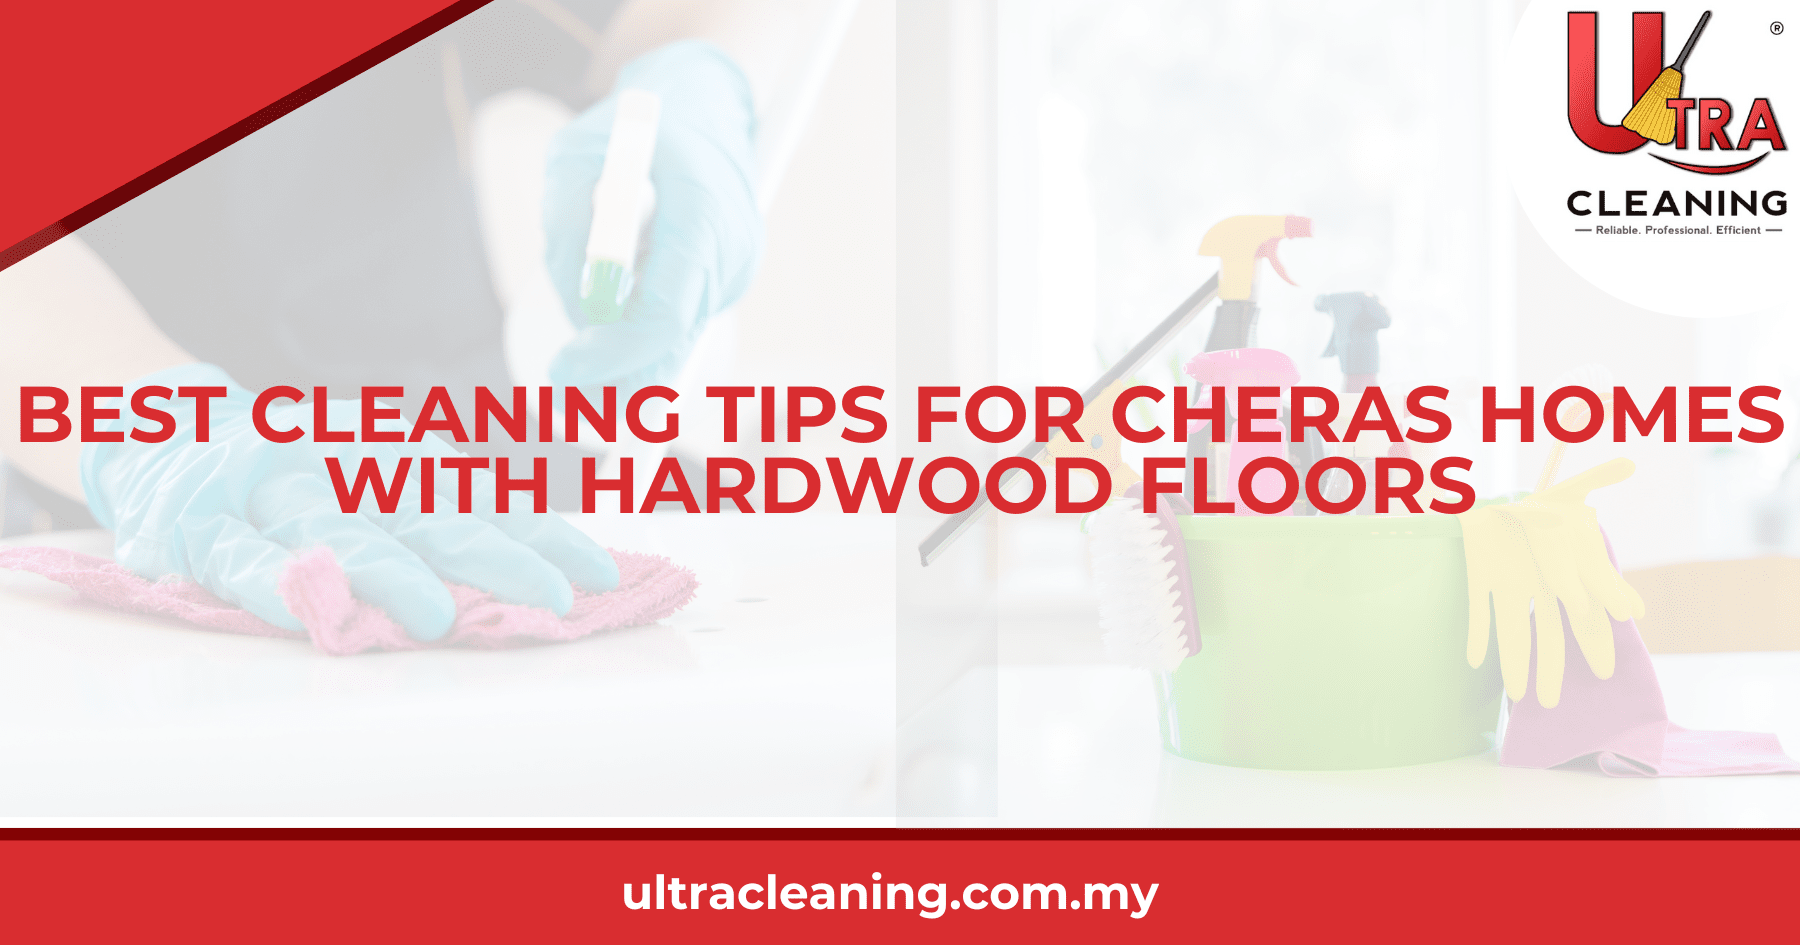 Best Cleaning Tips for Cheras Homes with Hardwood Floors